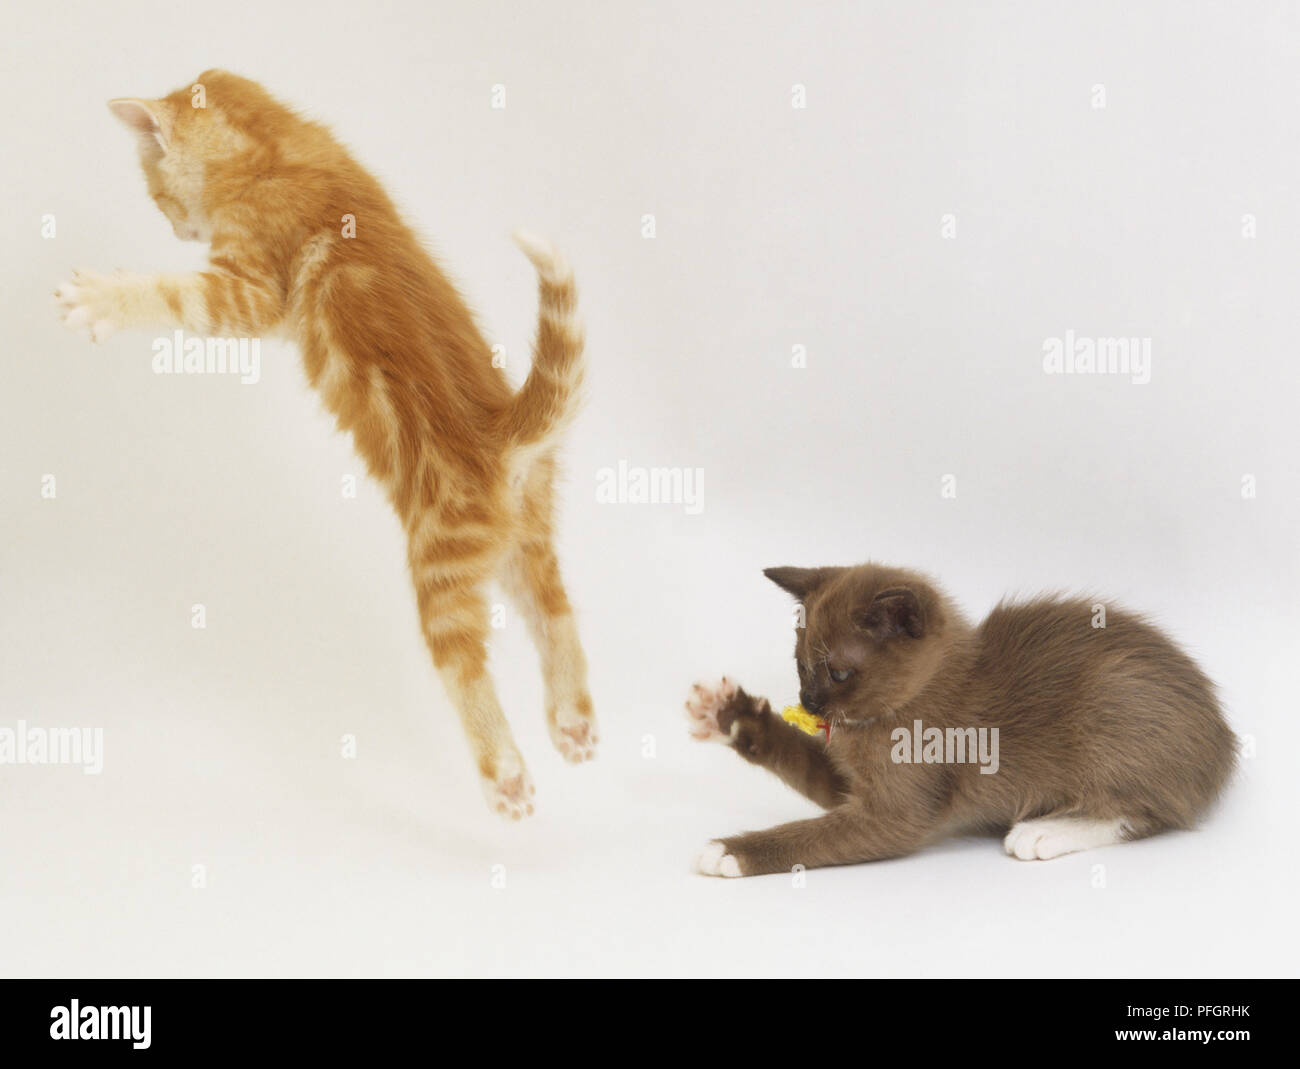 Two Kittens (Felis catus), ginger Tabby pouncing and crouching brown Kitten raising its claw, side view Stock Photo